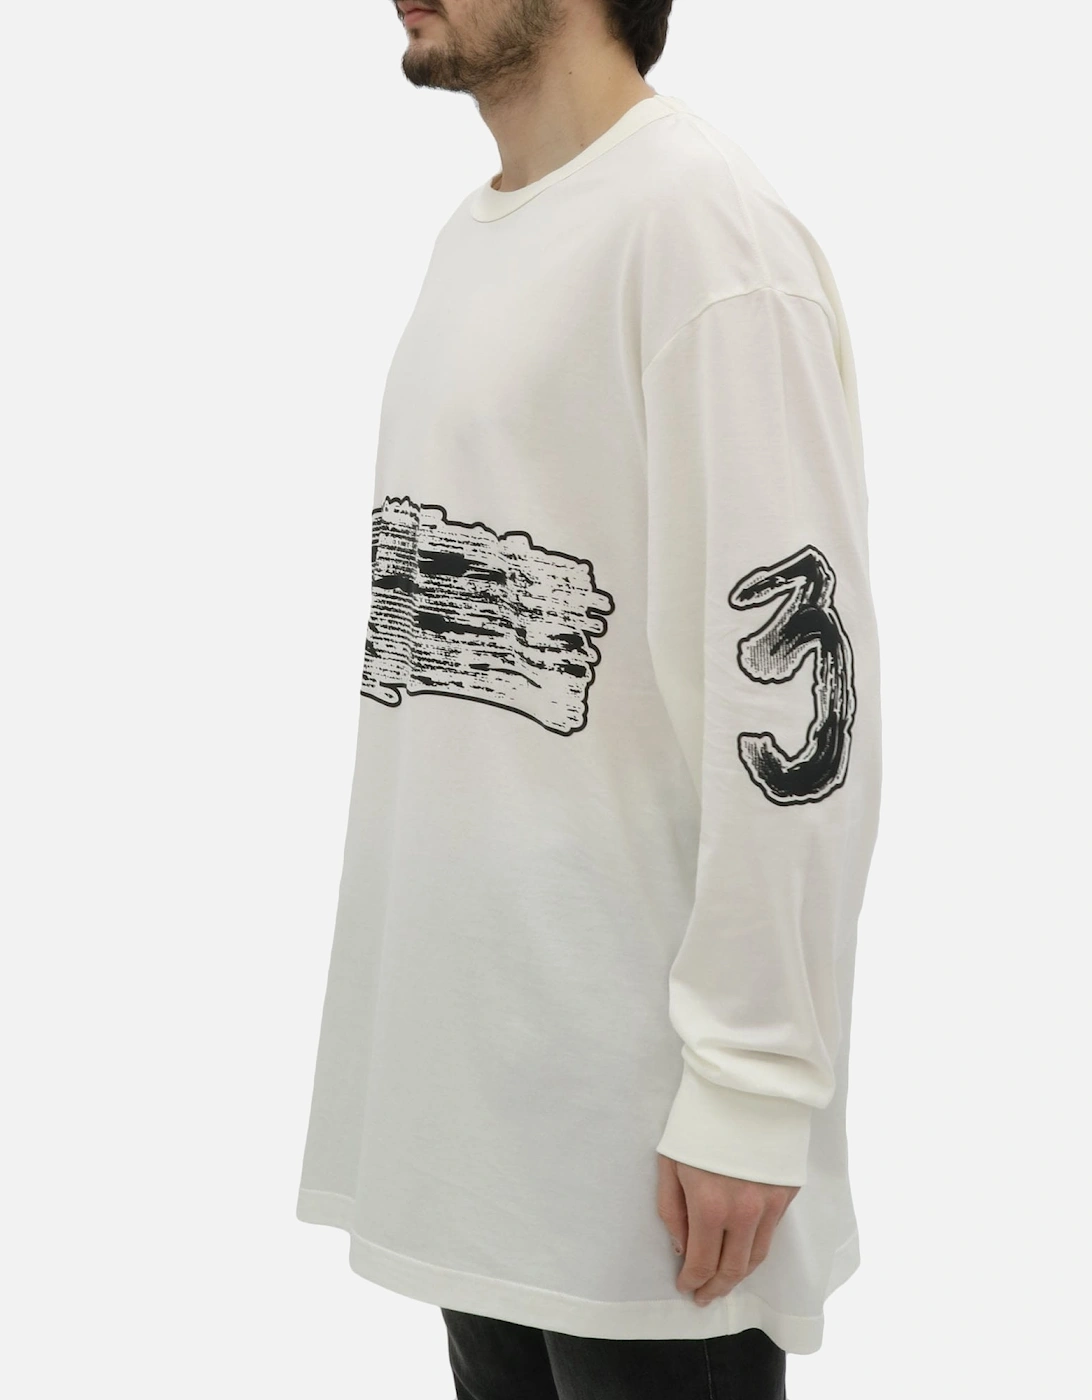 Oversized Graphic Off White LS Tee